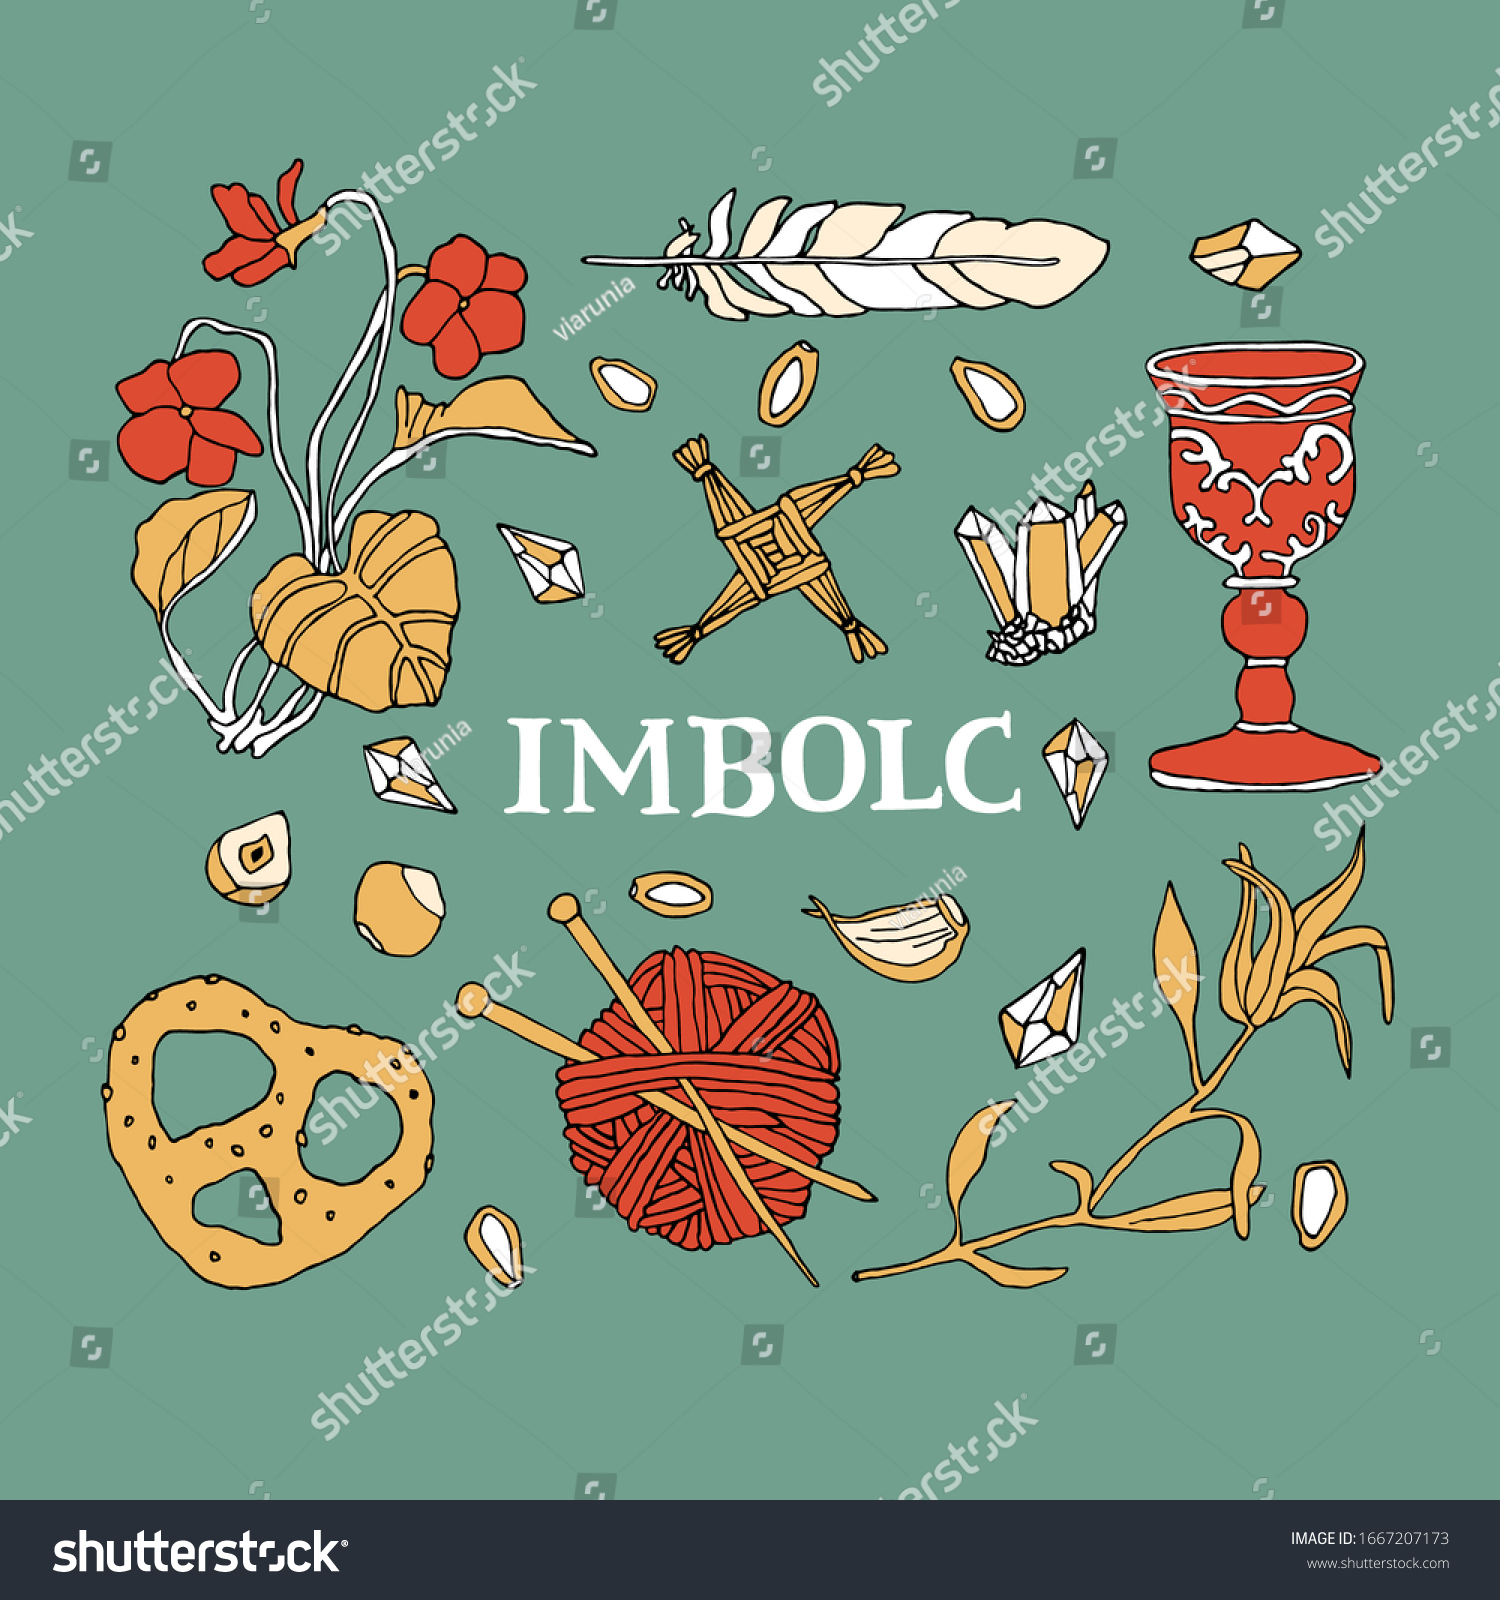 SVG of Imbolc symbols set. Celtic calendar concept. Wiccan and witchcraft elements, hand written lettering. Brigid Cross, knitting and medival goblet svg